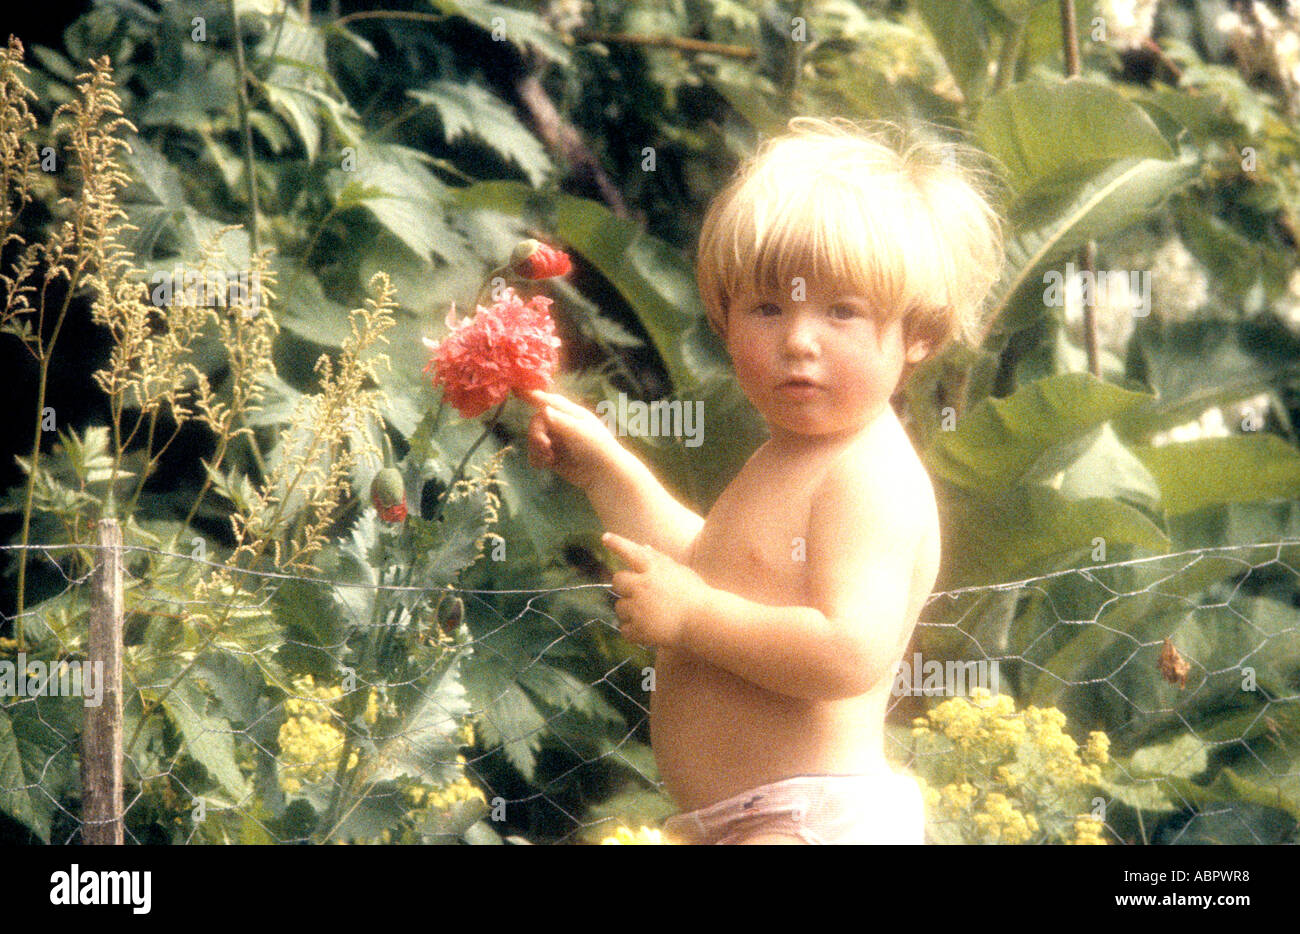 Toddler with a red flower in an english country garden Stock Photo